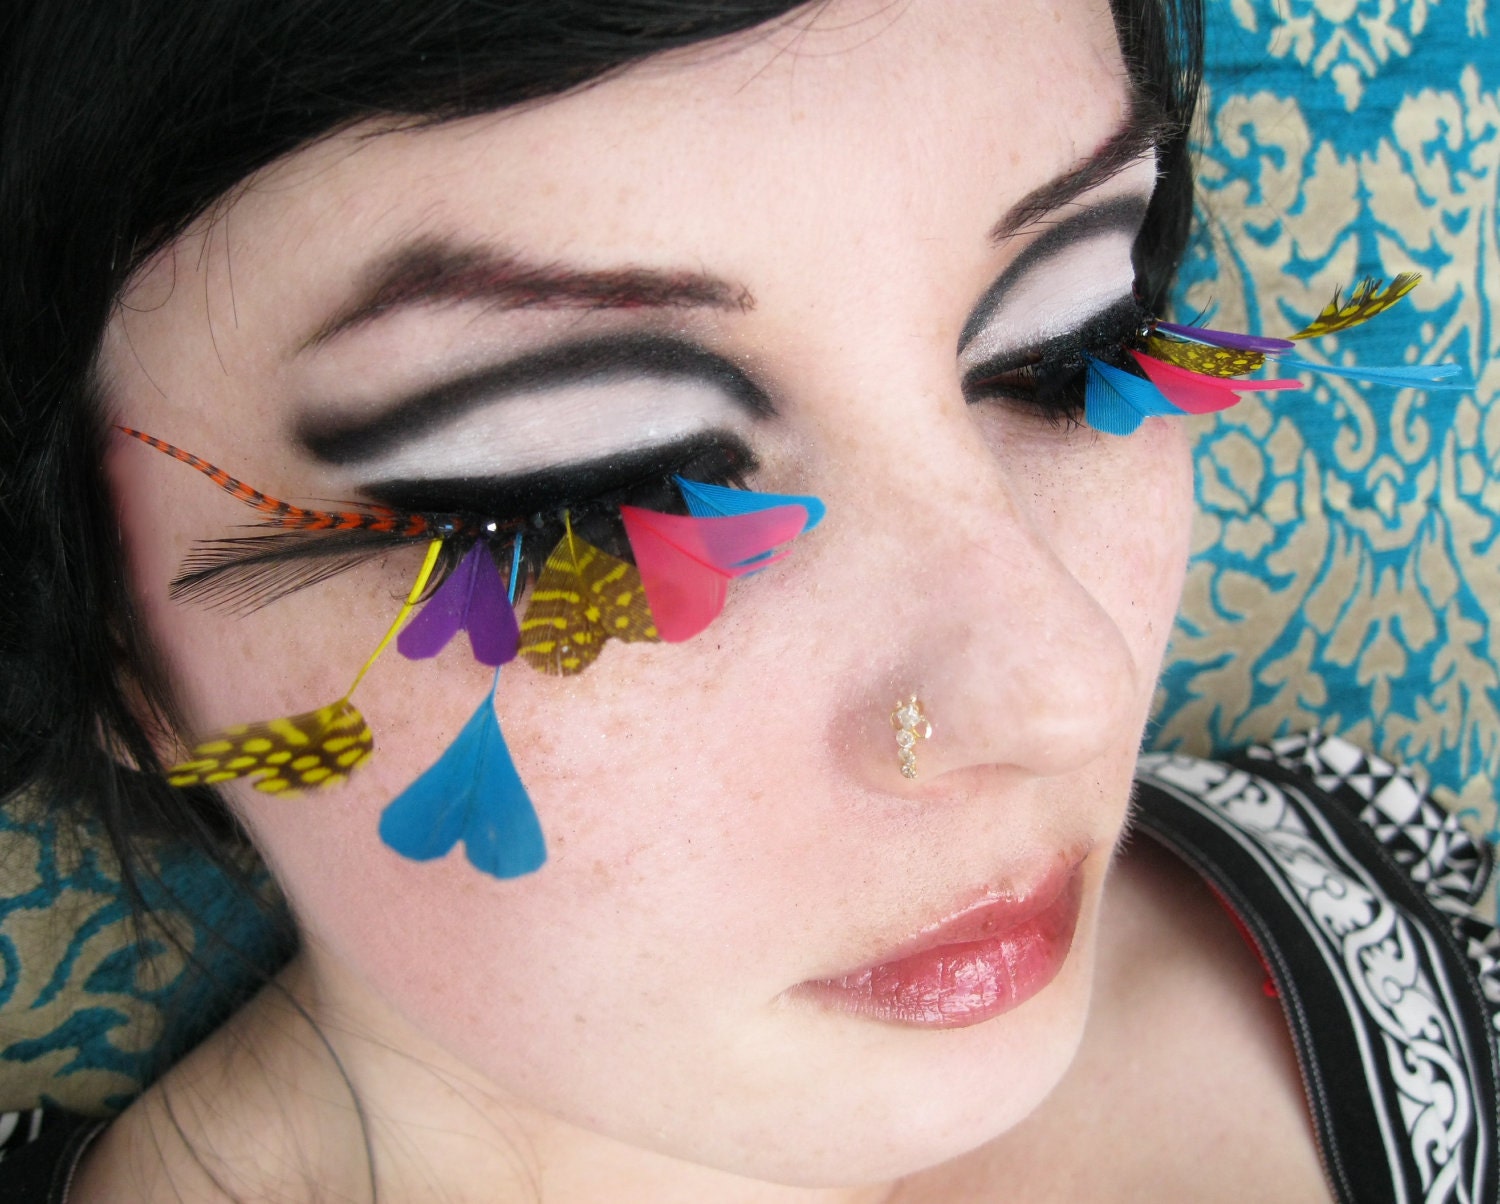 Love Eyes - Mod Psychedelic Feather Eyelashes w/ Rainbow-Colored Hearts and Swarovski Crystals - By Moonshine Baby